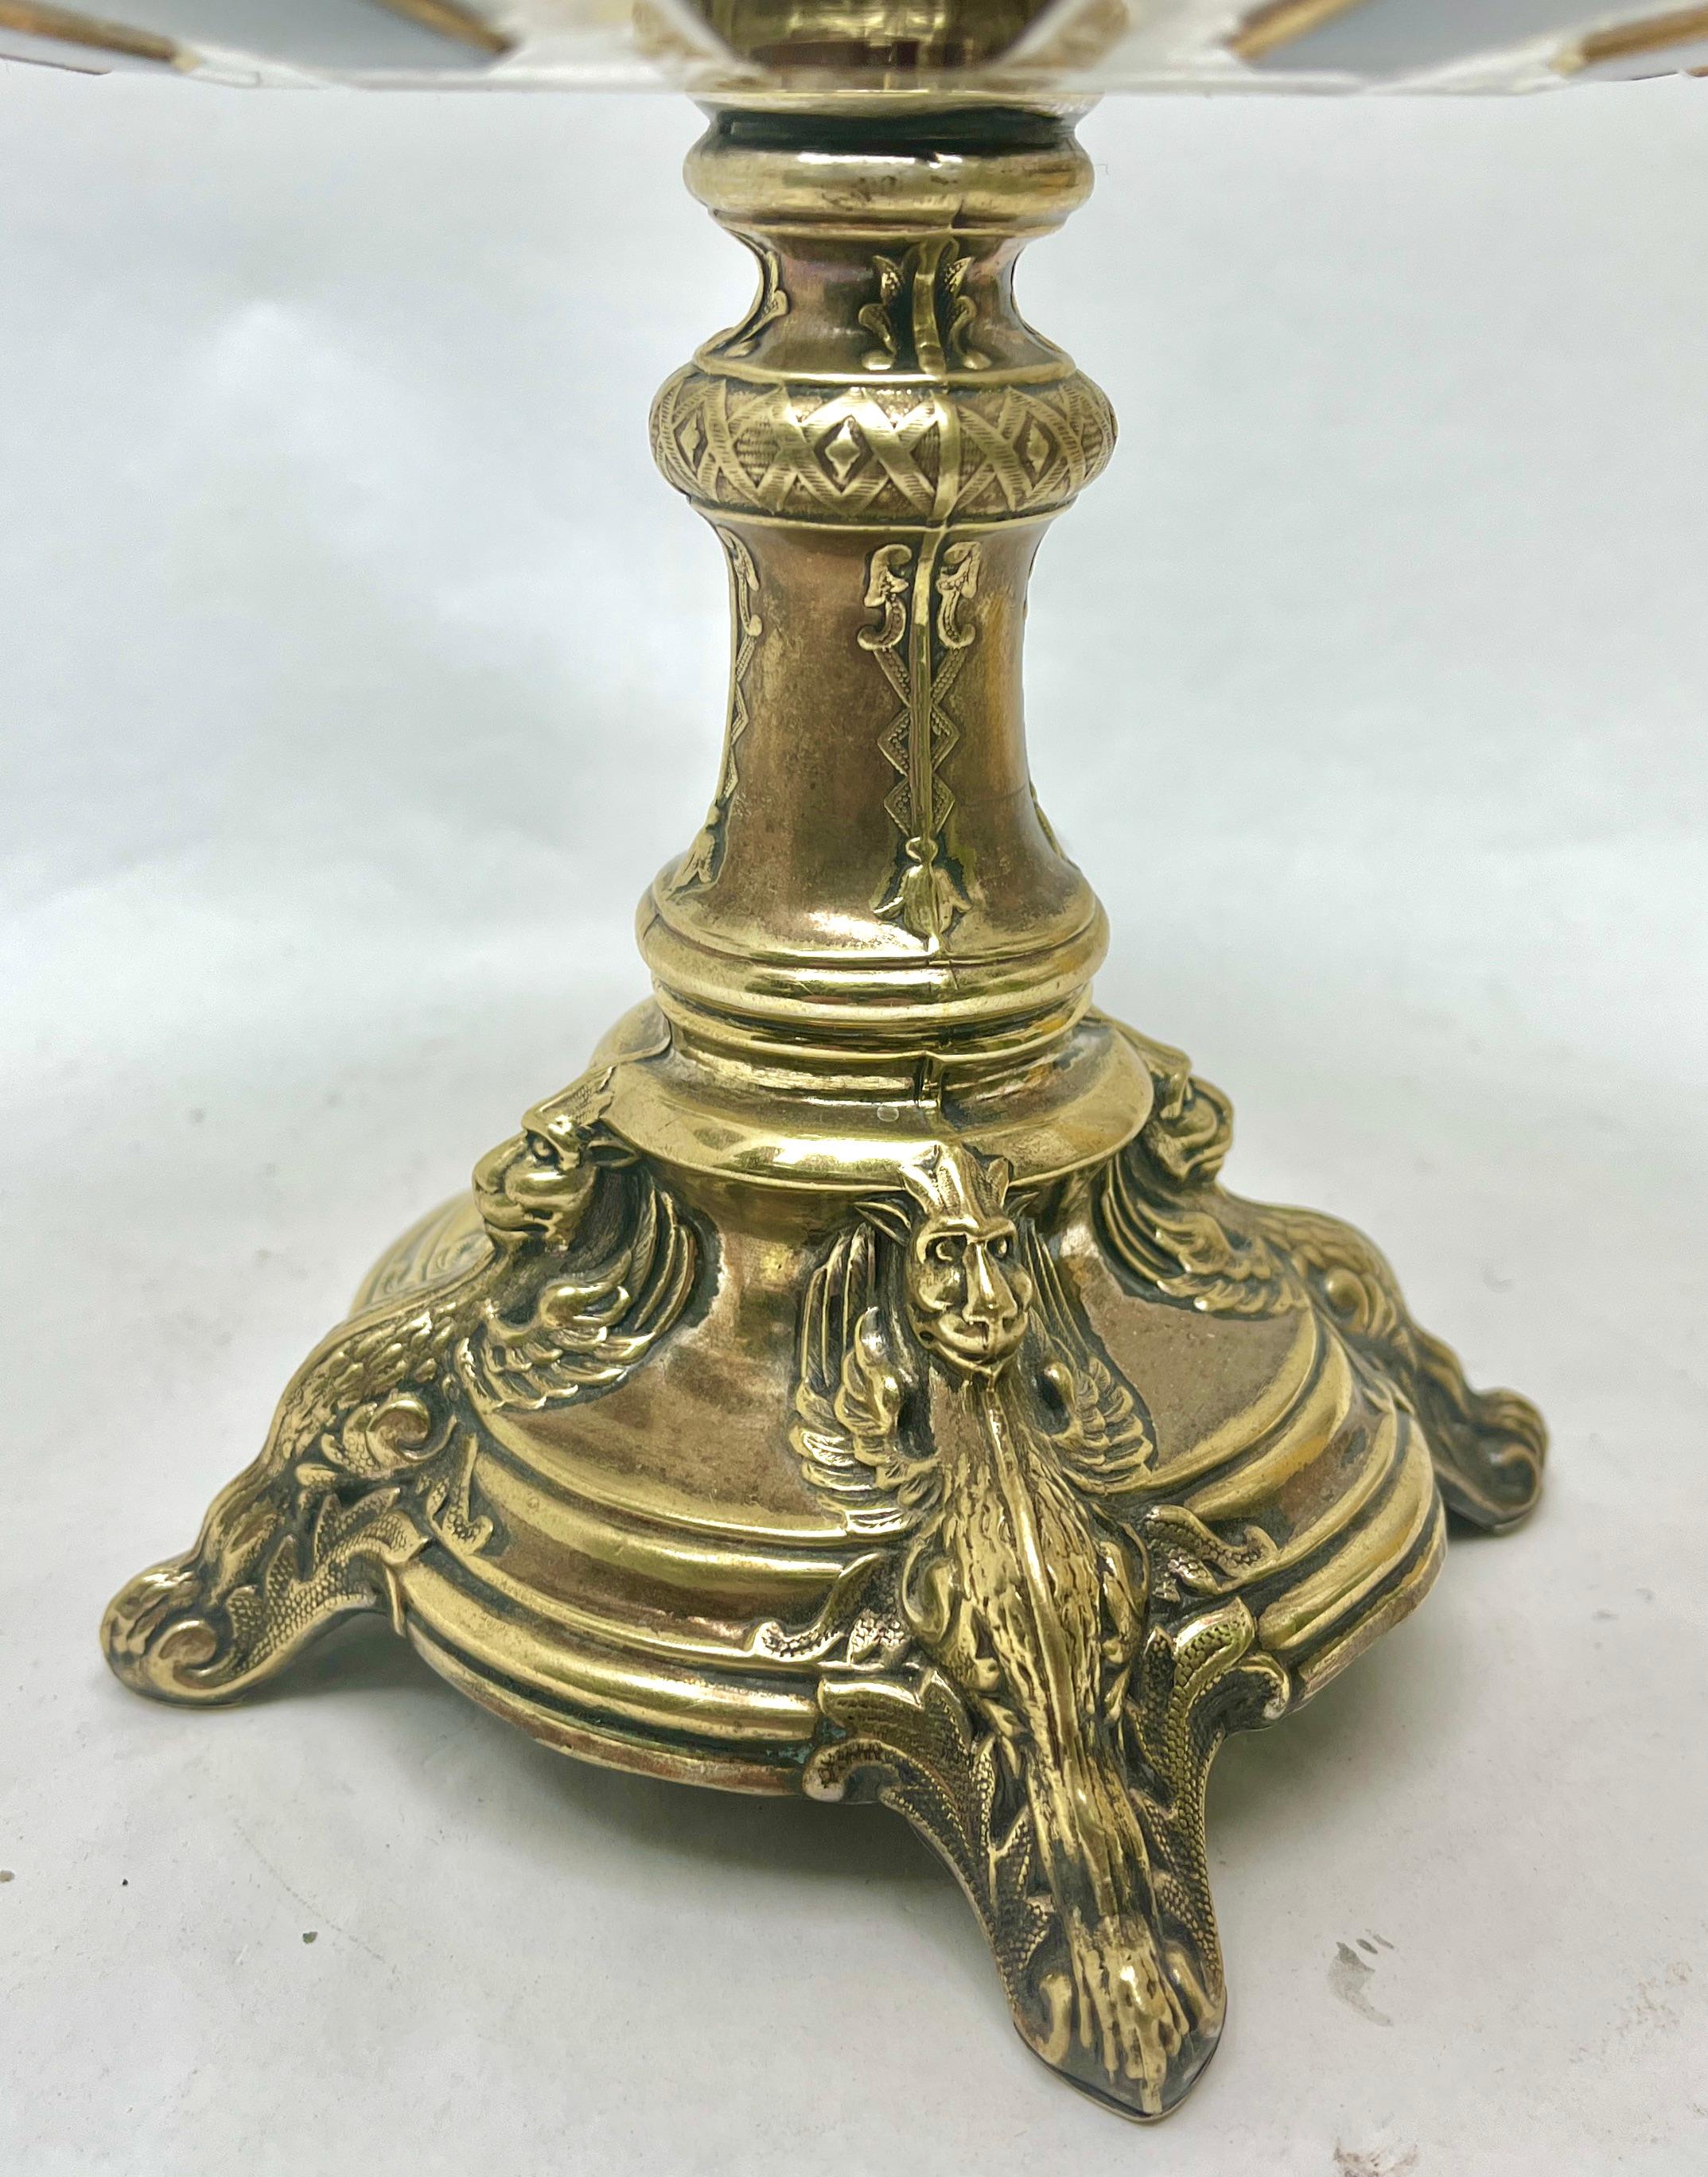 Silver Plate Art Nouveau Centrepiece Attributed to Kayser in Germany, circa 1900 For Sale